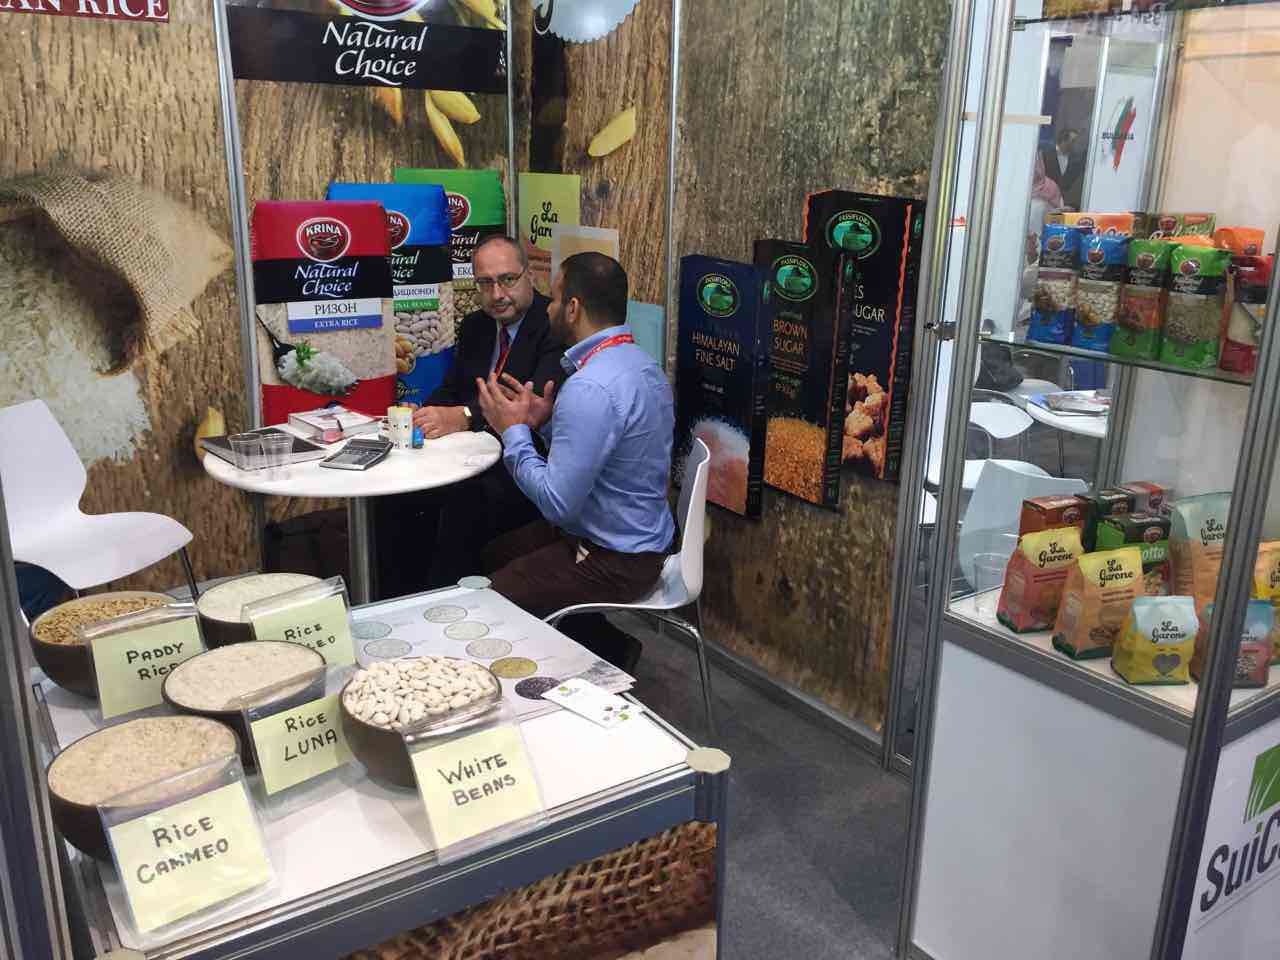 PARTICIPATION IN GULFOOD SUICO